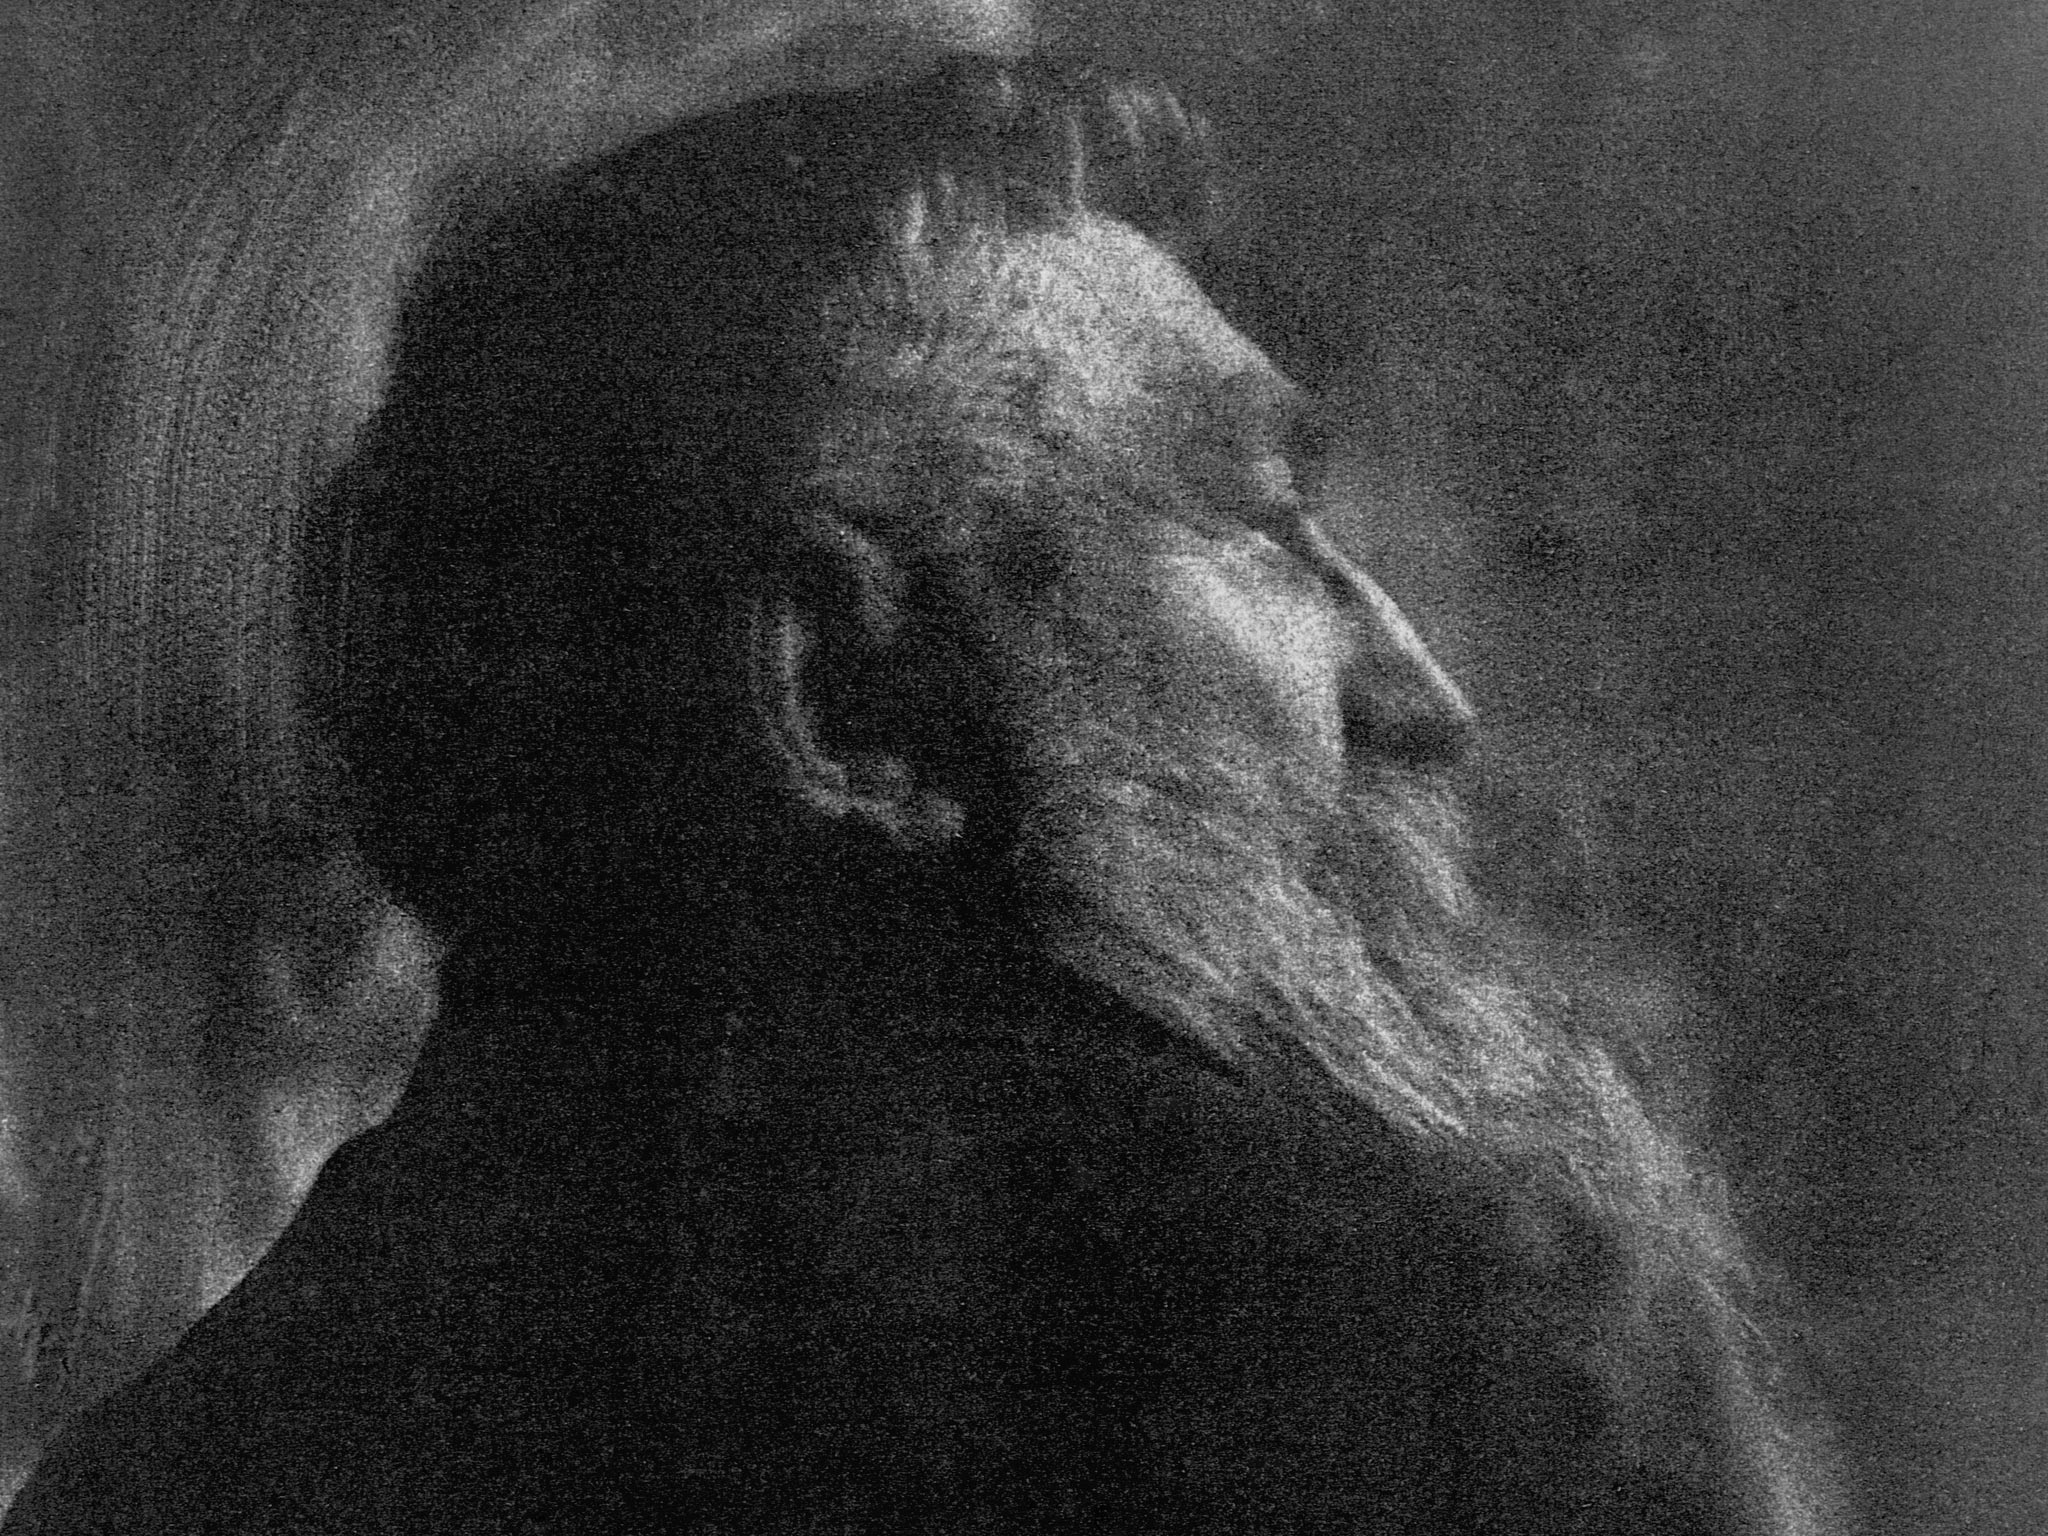 Auguste Rodin by Gertrude Käsebier - picture of the day | Art and design | The Guardian